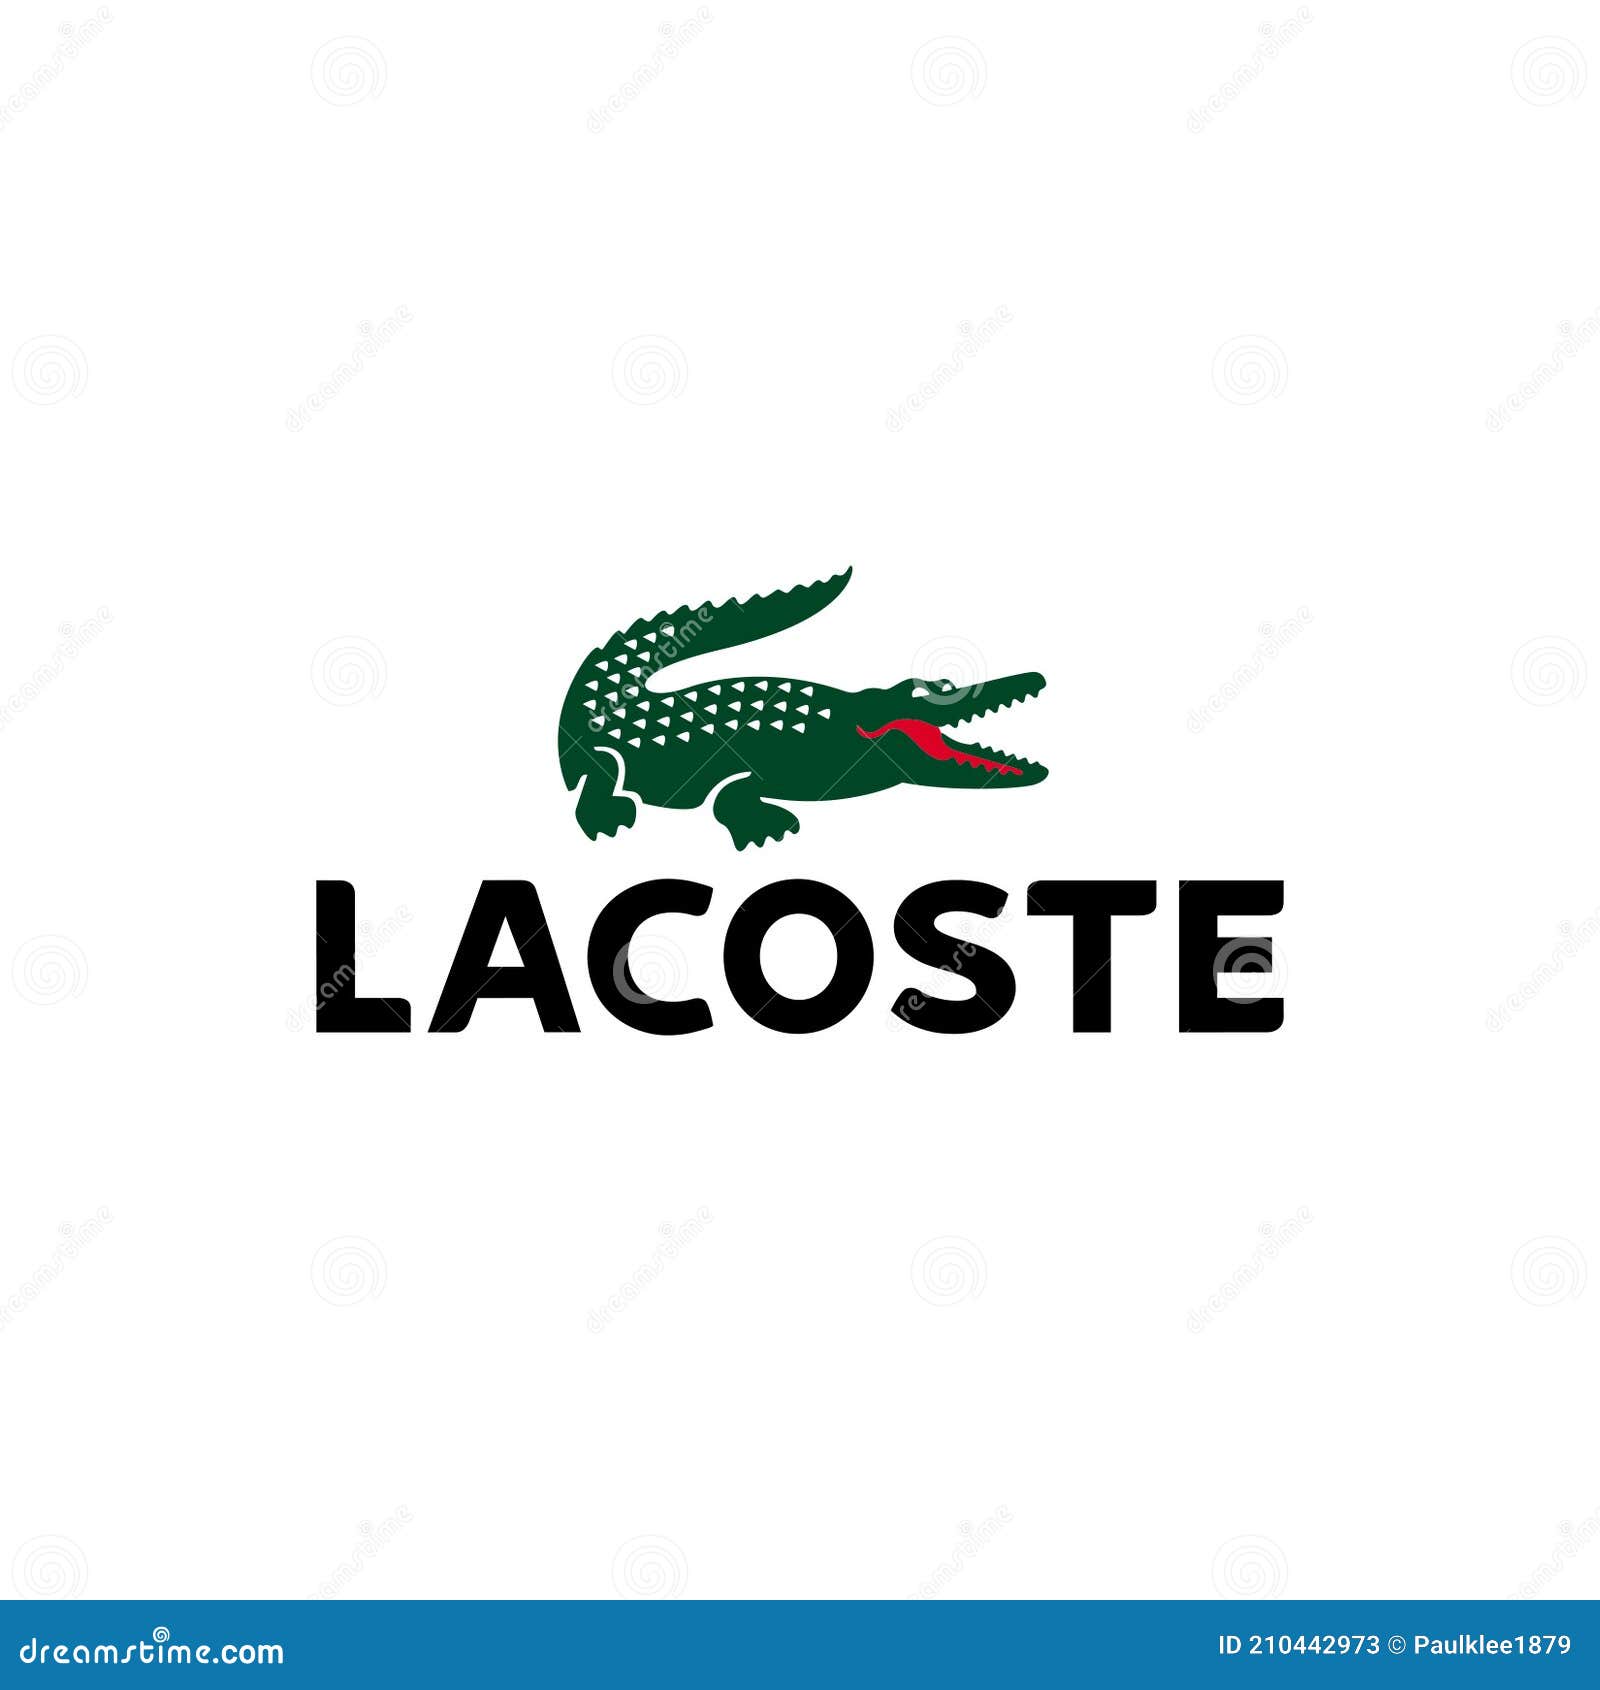 LACOSTE Editorial Illustrative on White Background Editorial Stock Photo - Illustration of vectors, flat: 210442973